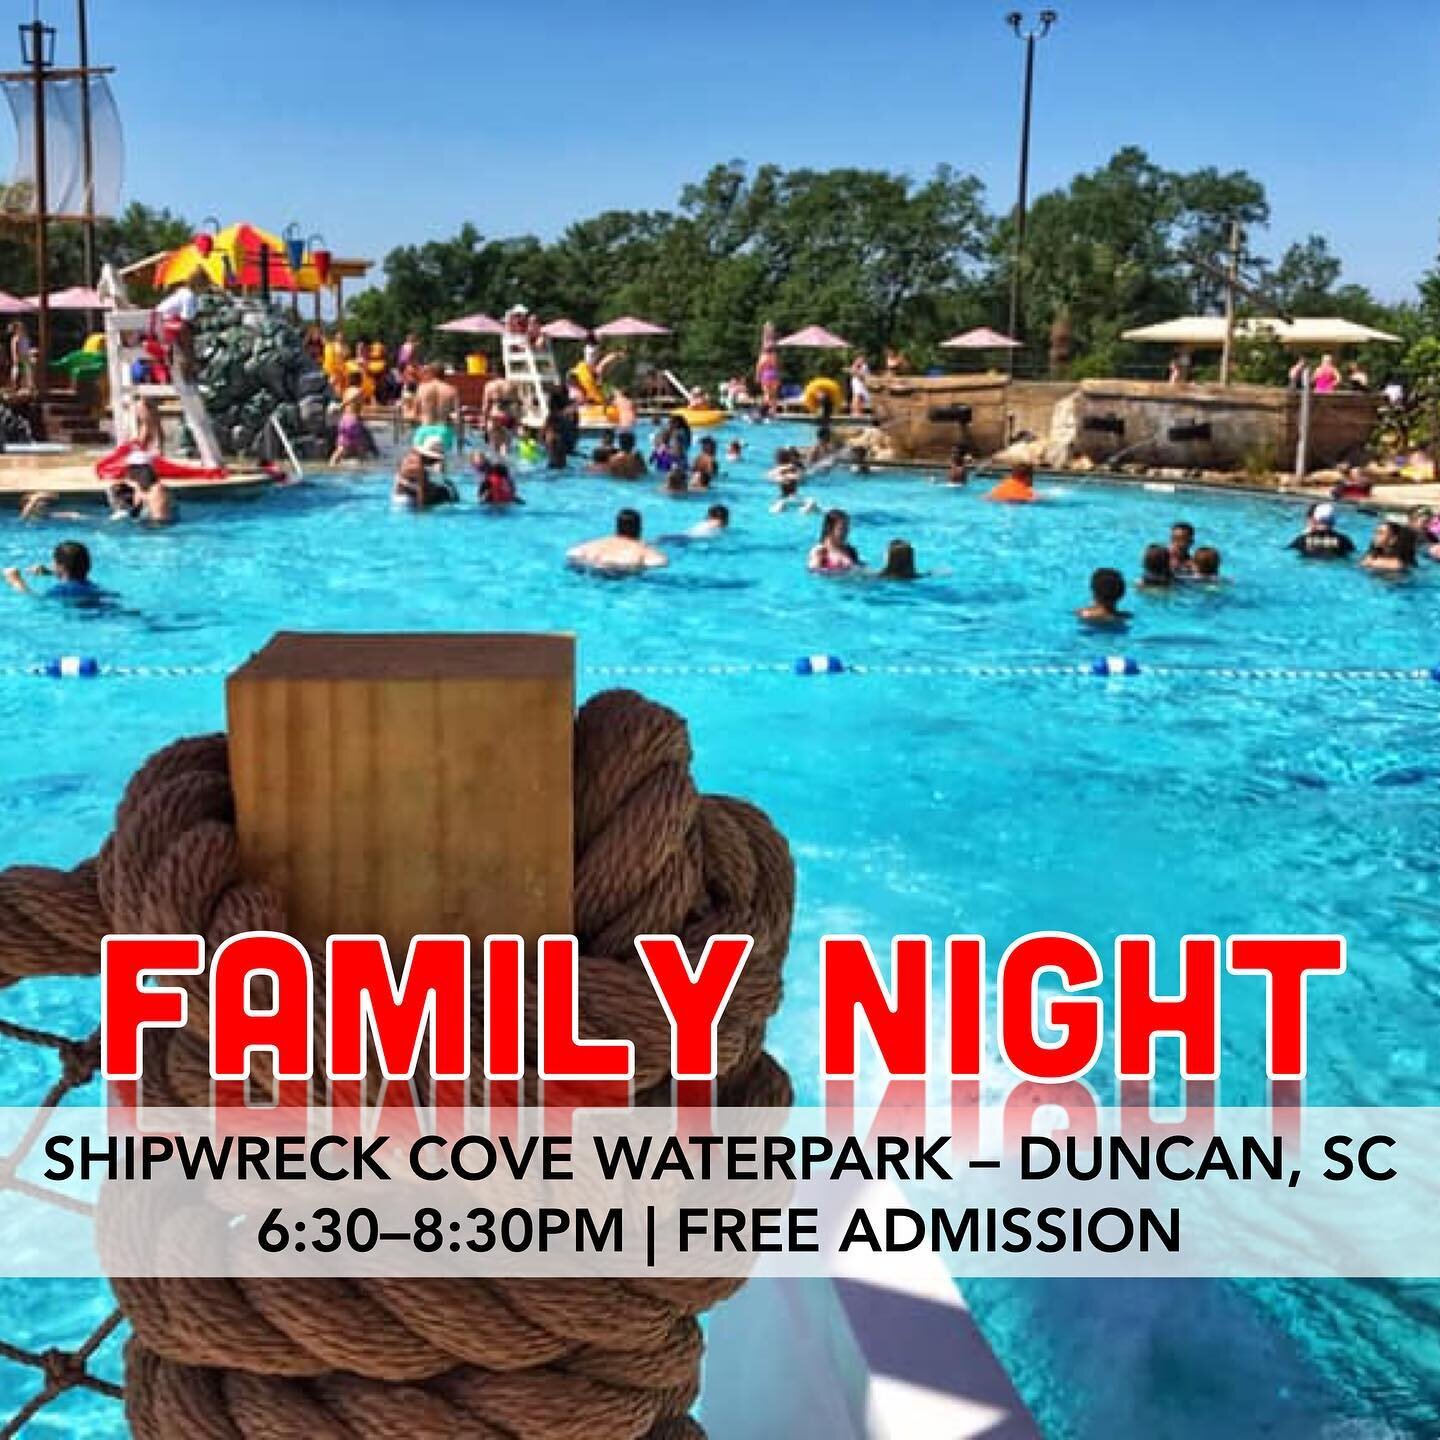 Everyone come out tonight to Shipwreck Cove Waterpark in Duncan! It&rsquo;s free! Bring a friend!